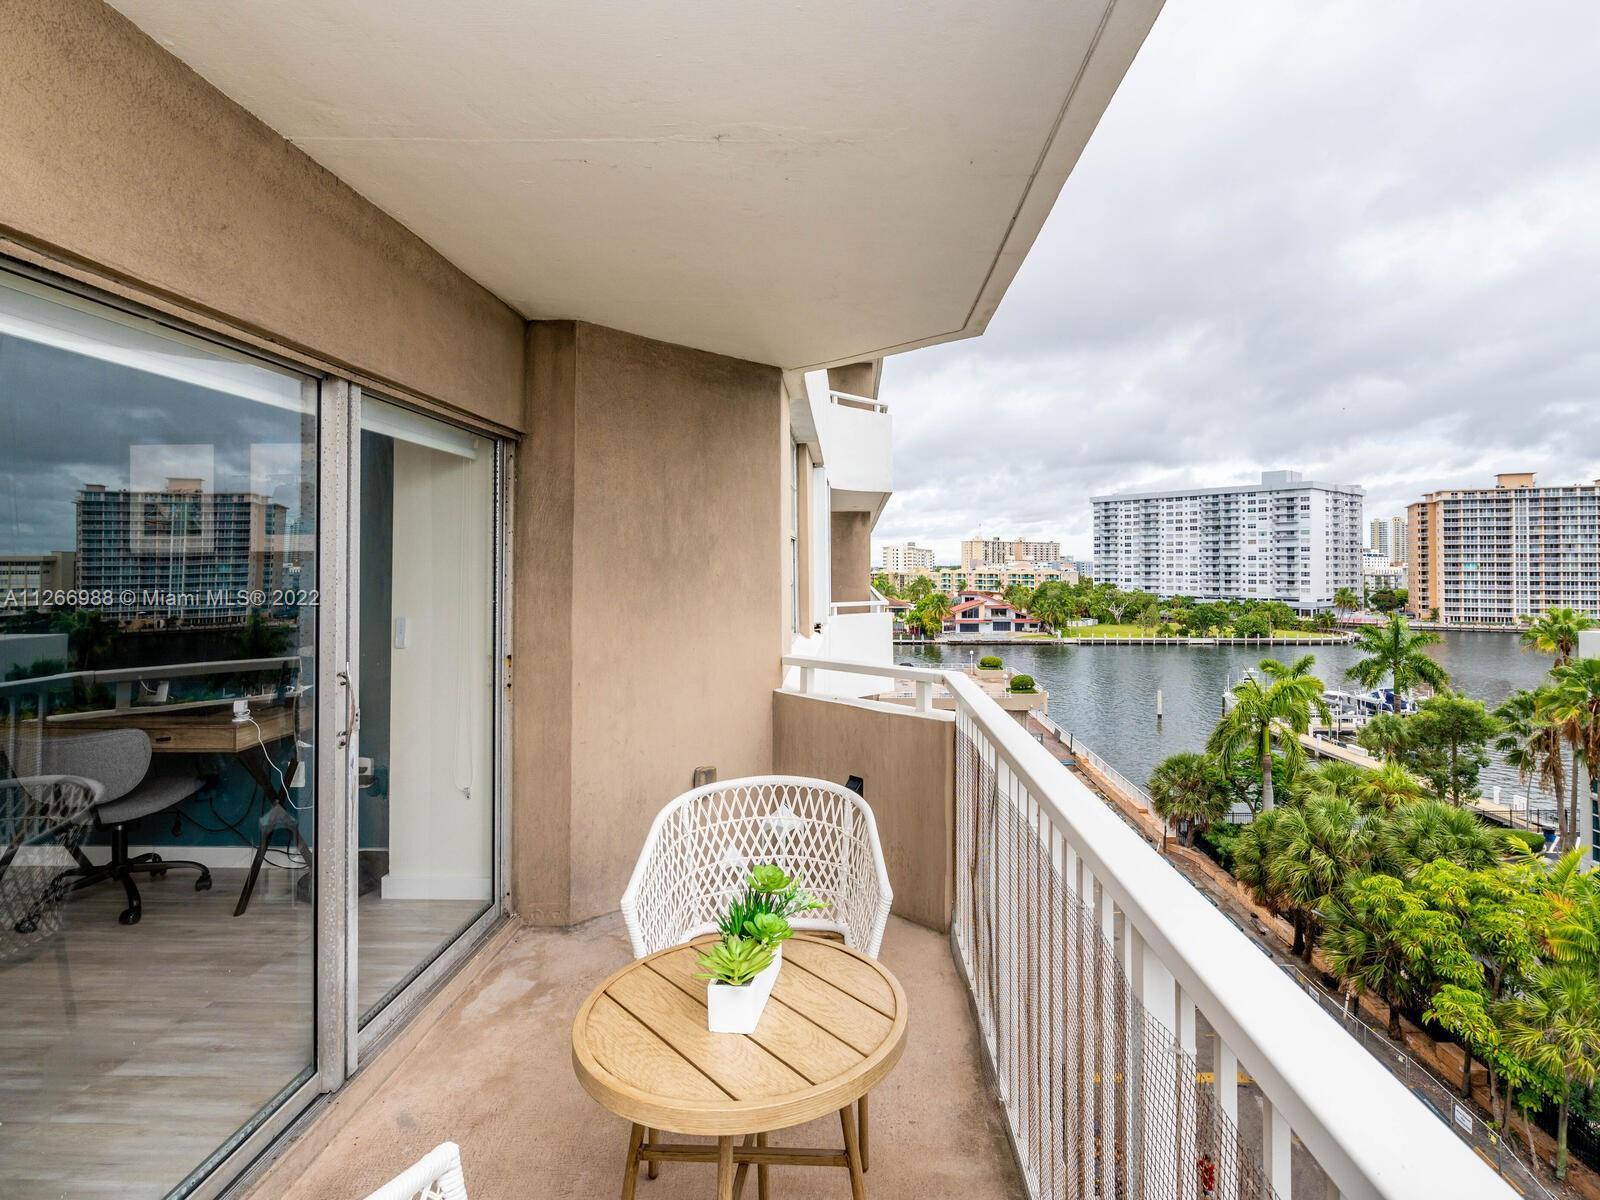 1 Br 1 Bath with a great Intracoastal View! Upgraded Kitchen, New Stainless Appliances. Updated Bath